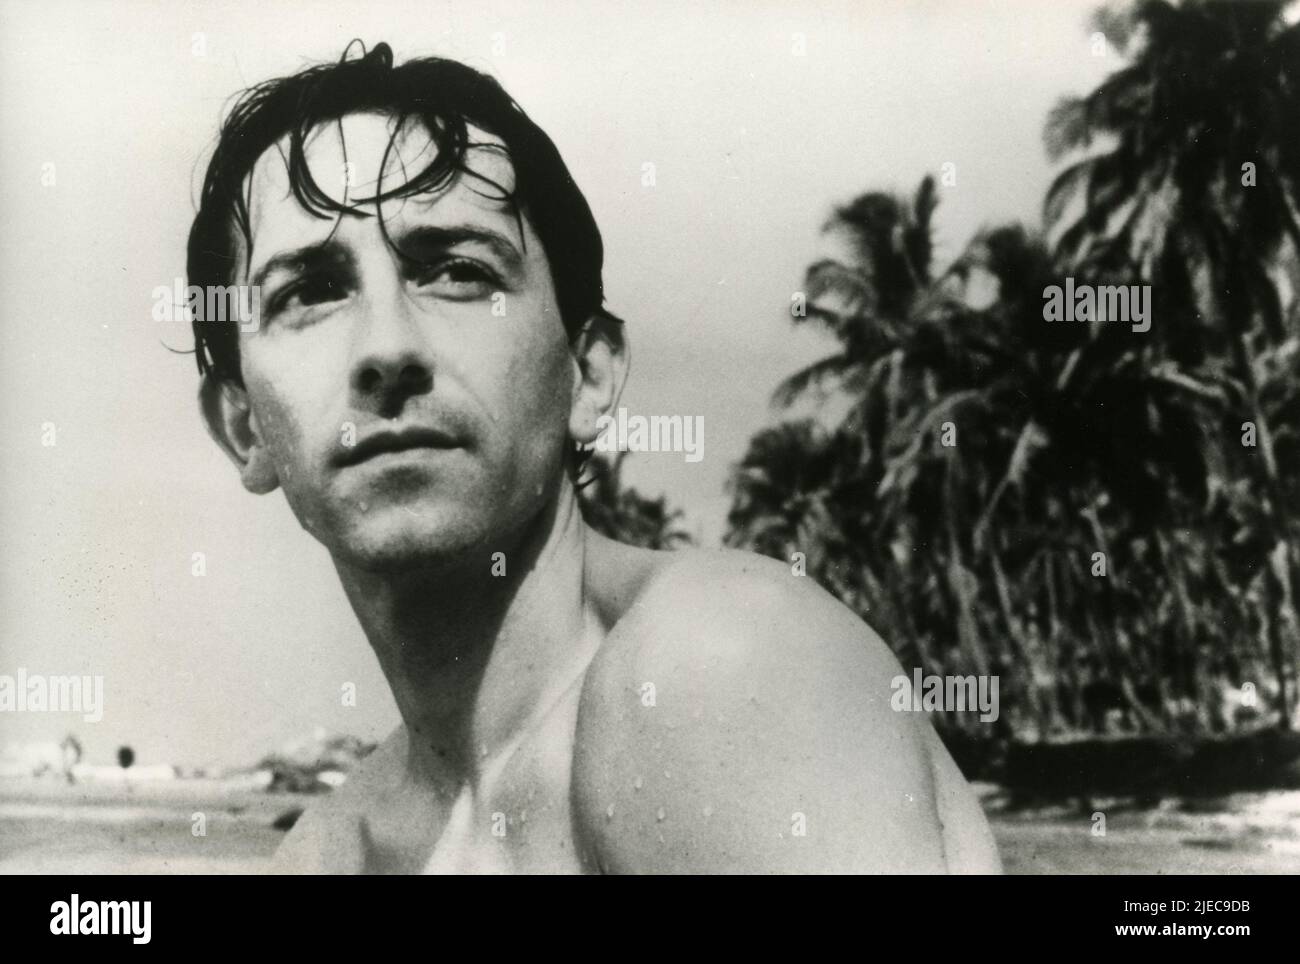 French actor Jean-Hugues Anglade in the movie Nocturne Indien, 1989 Stock Photo